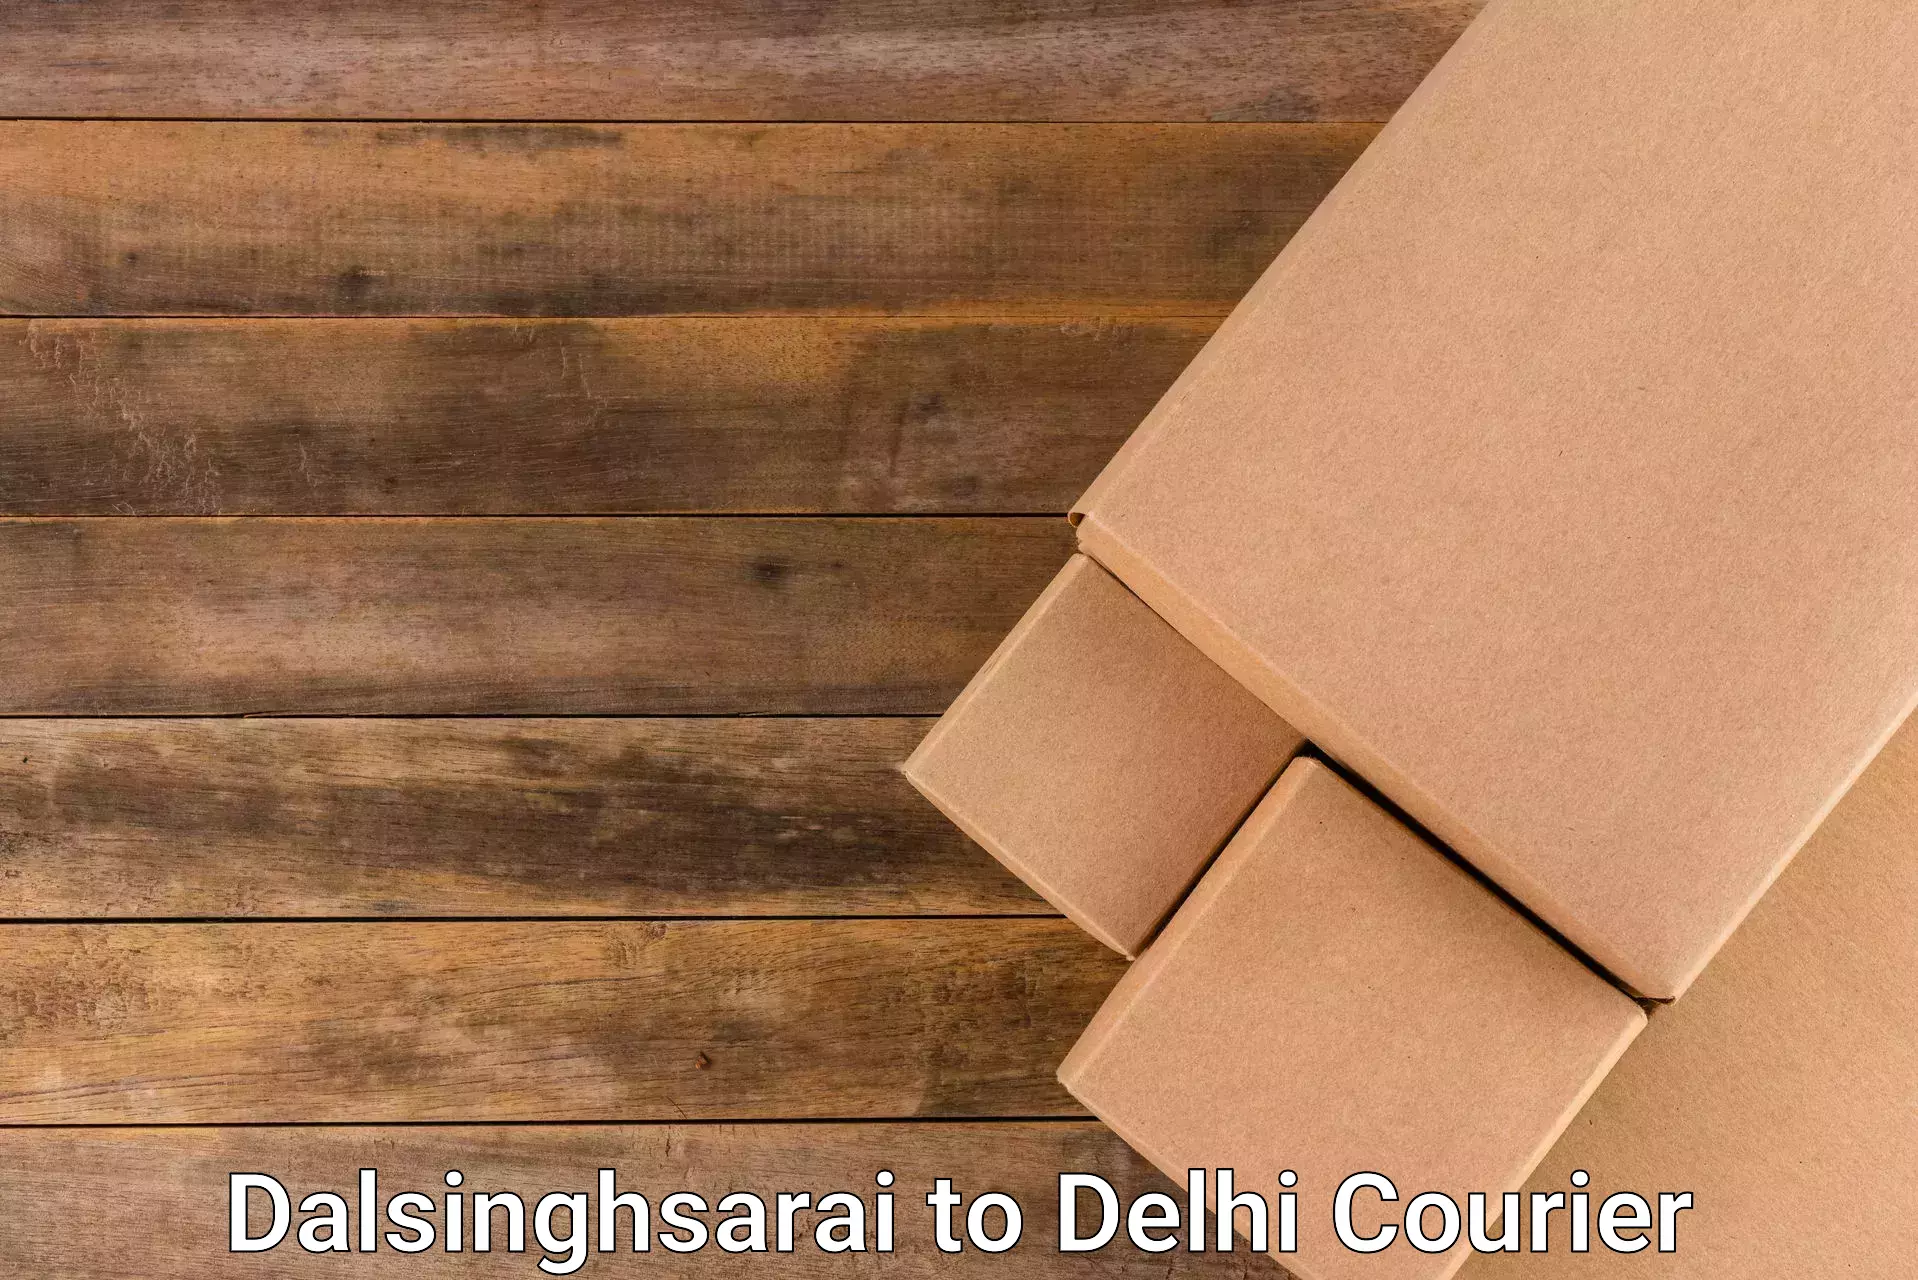 Medical delivery services Dalsinghsarai to Lodhi Road